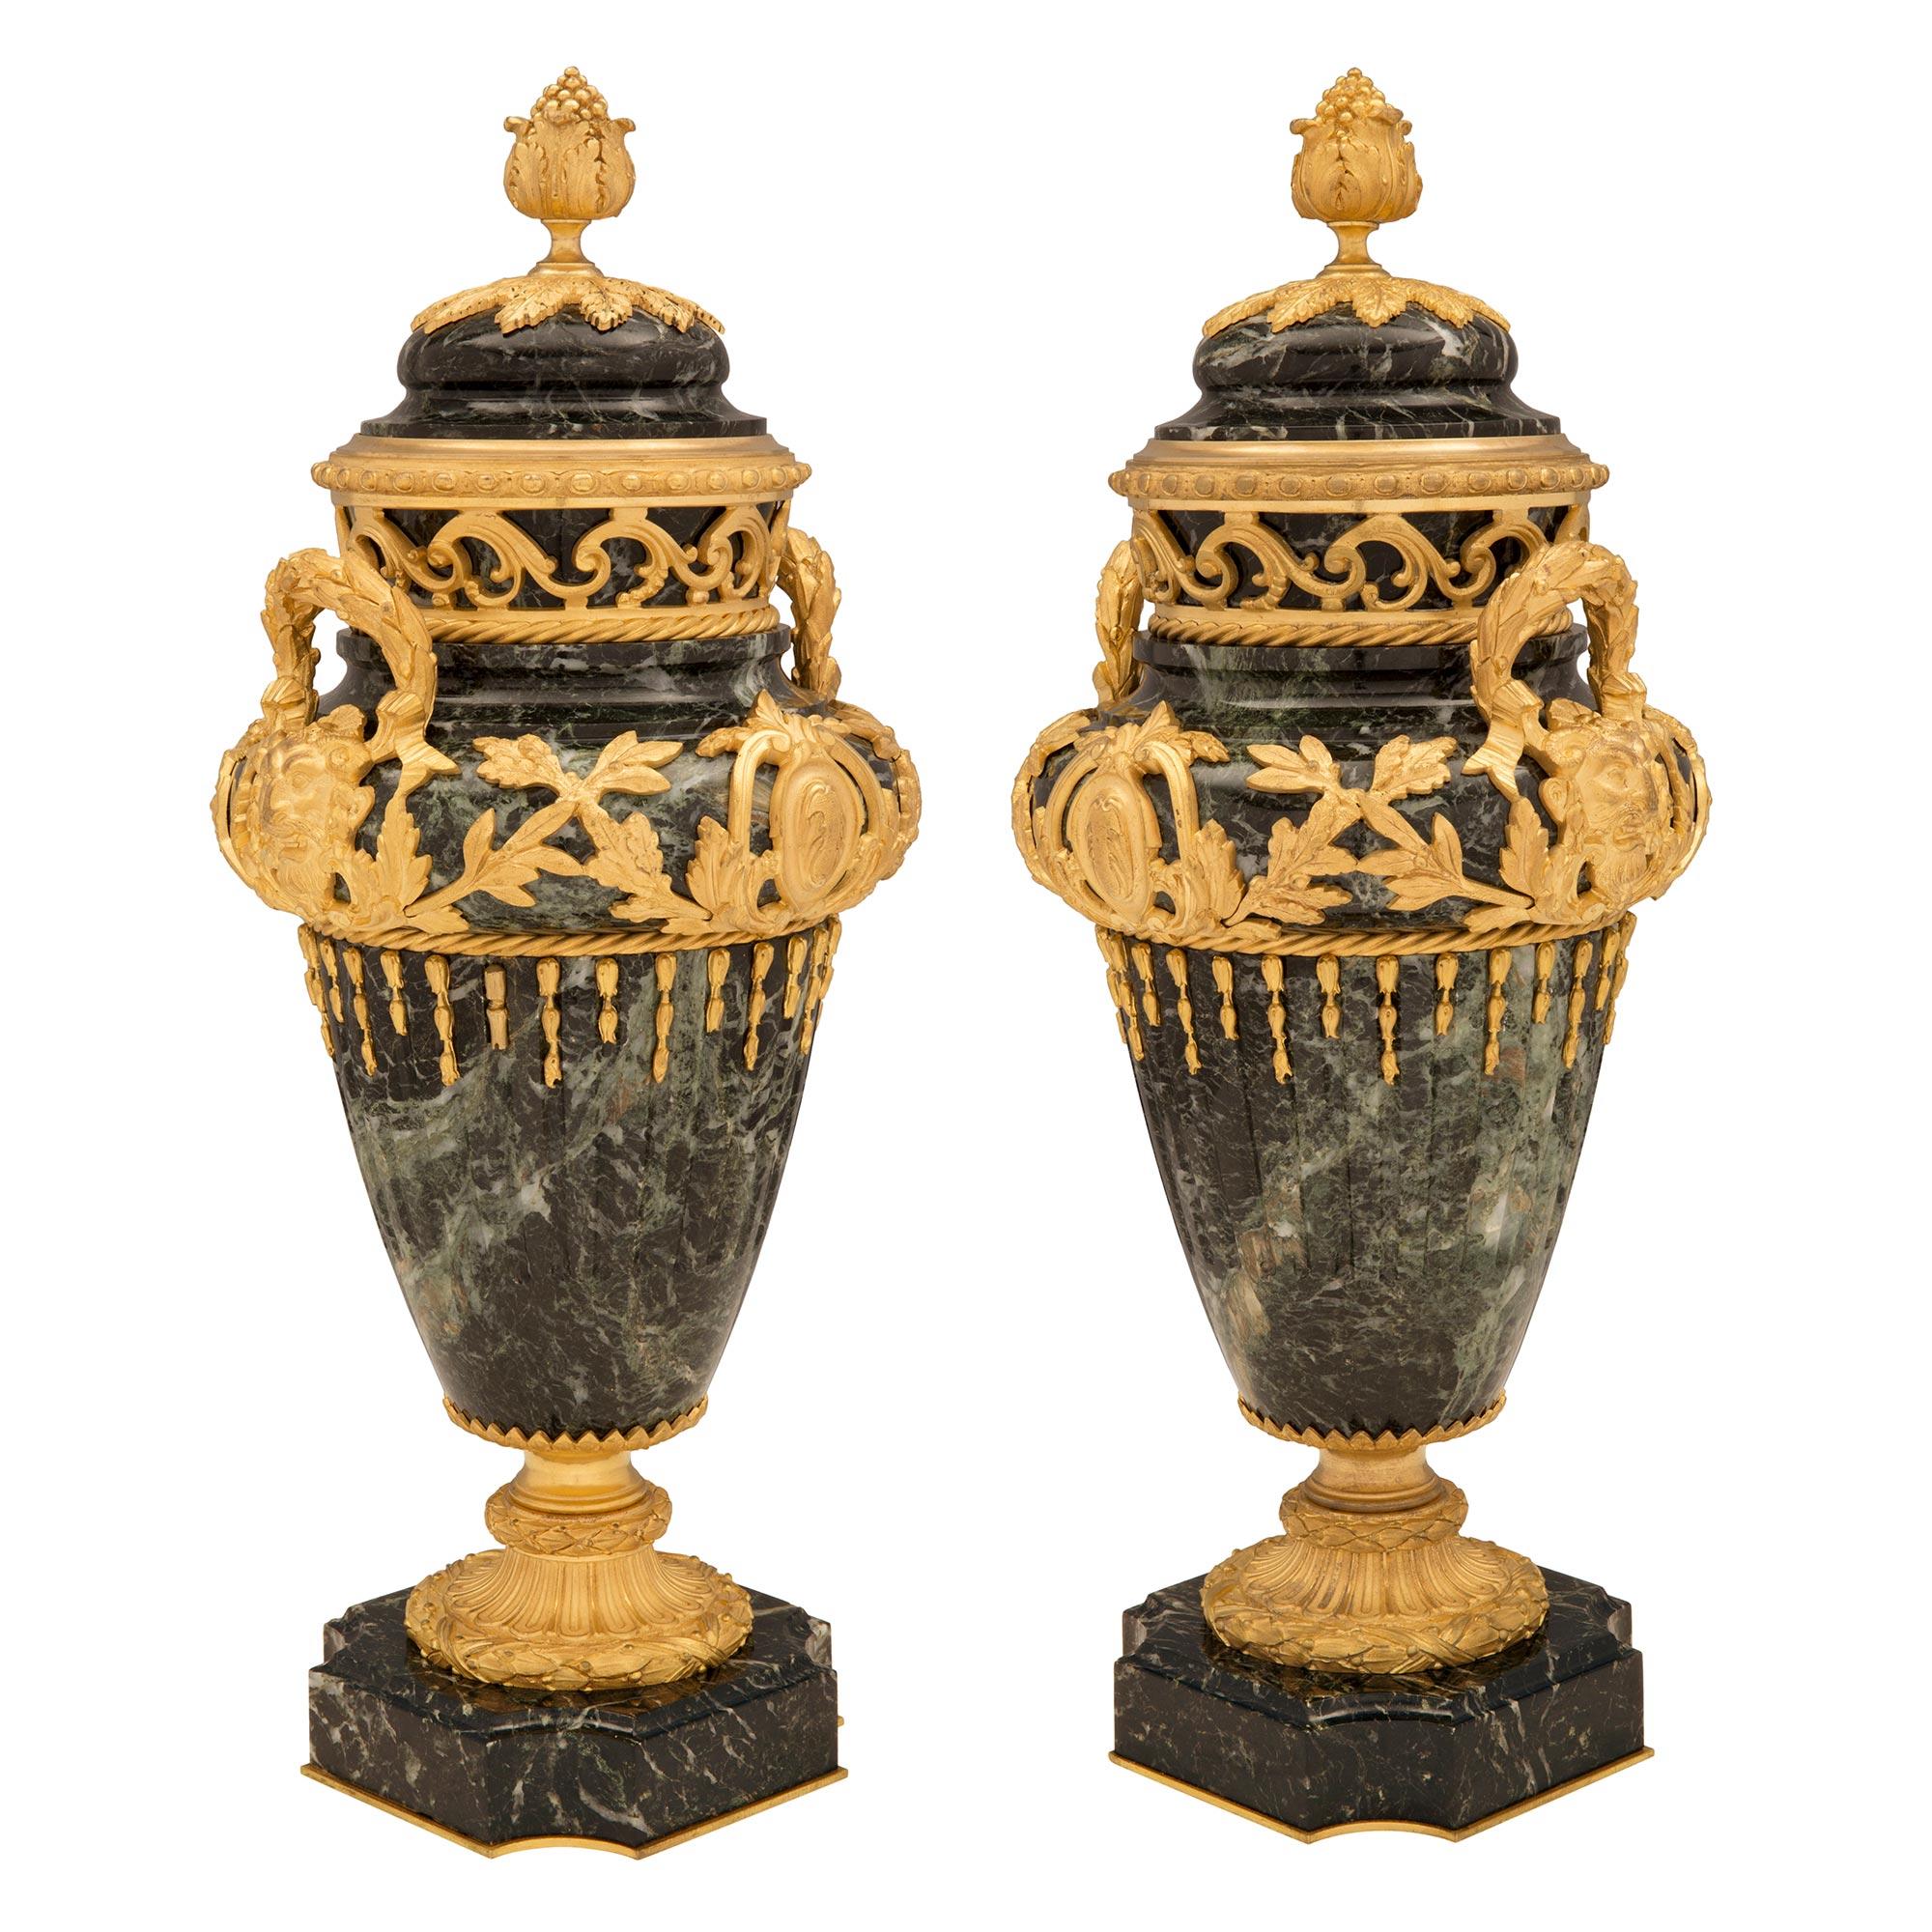 Pair of French 19th Century Vert de Patricia Marble and Ormolu Lidded Urns In Good Condition For Sale In West Palm Beach, FL